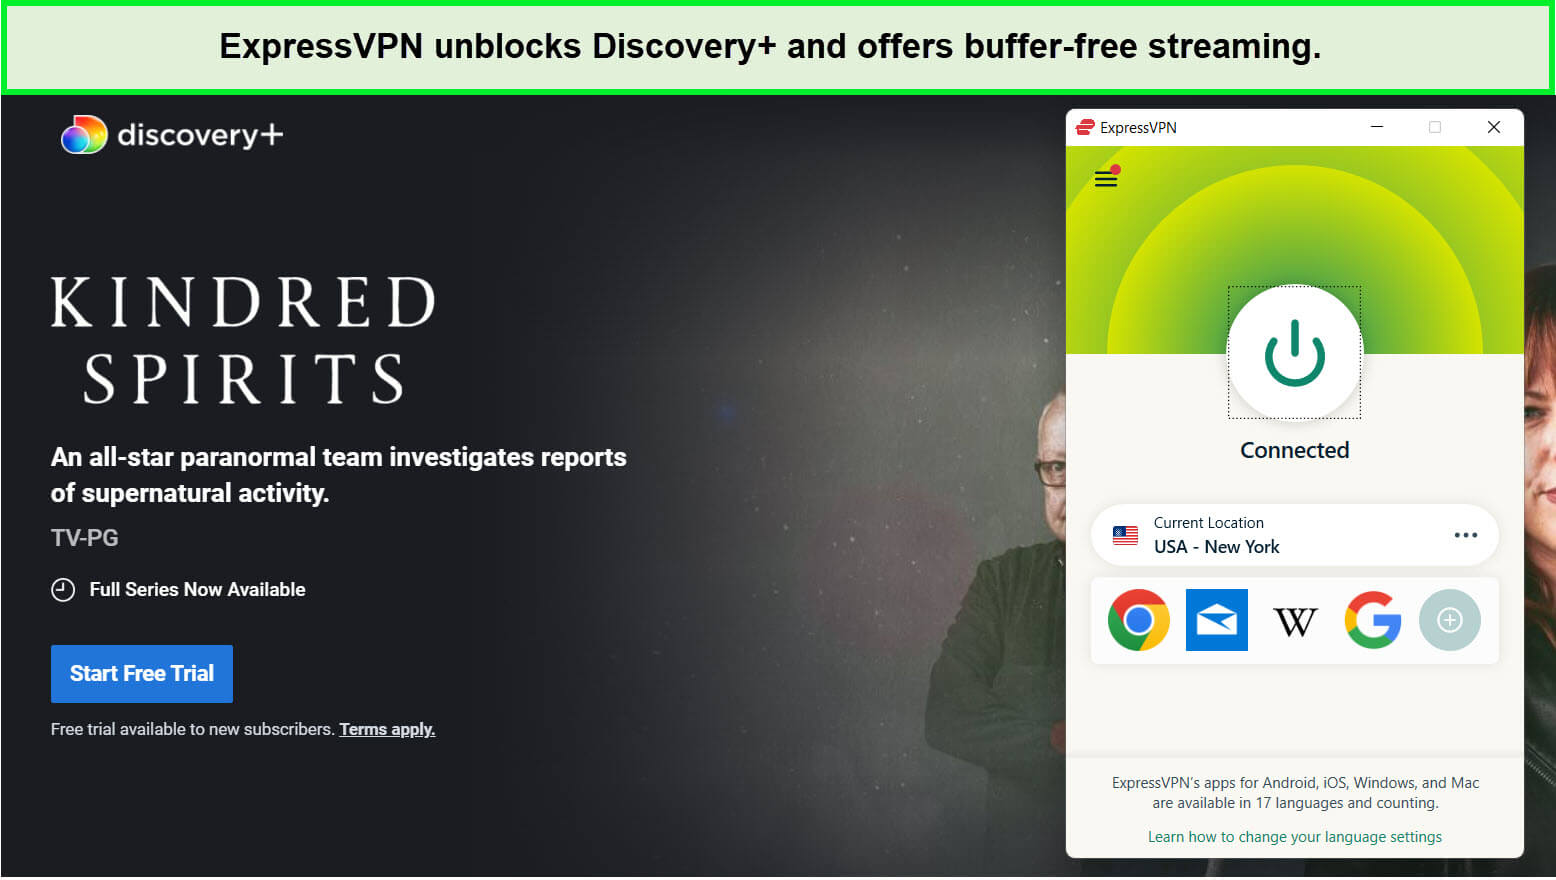 expressvpn-unblocks-kindred-spirits-s7-on-discovery-plus-in canada